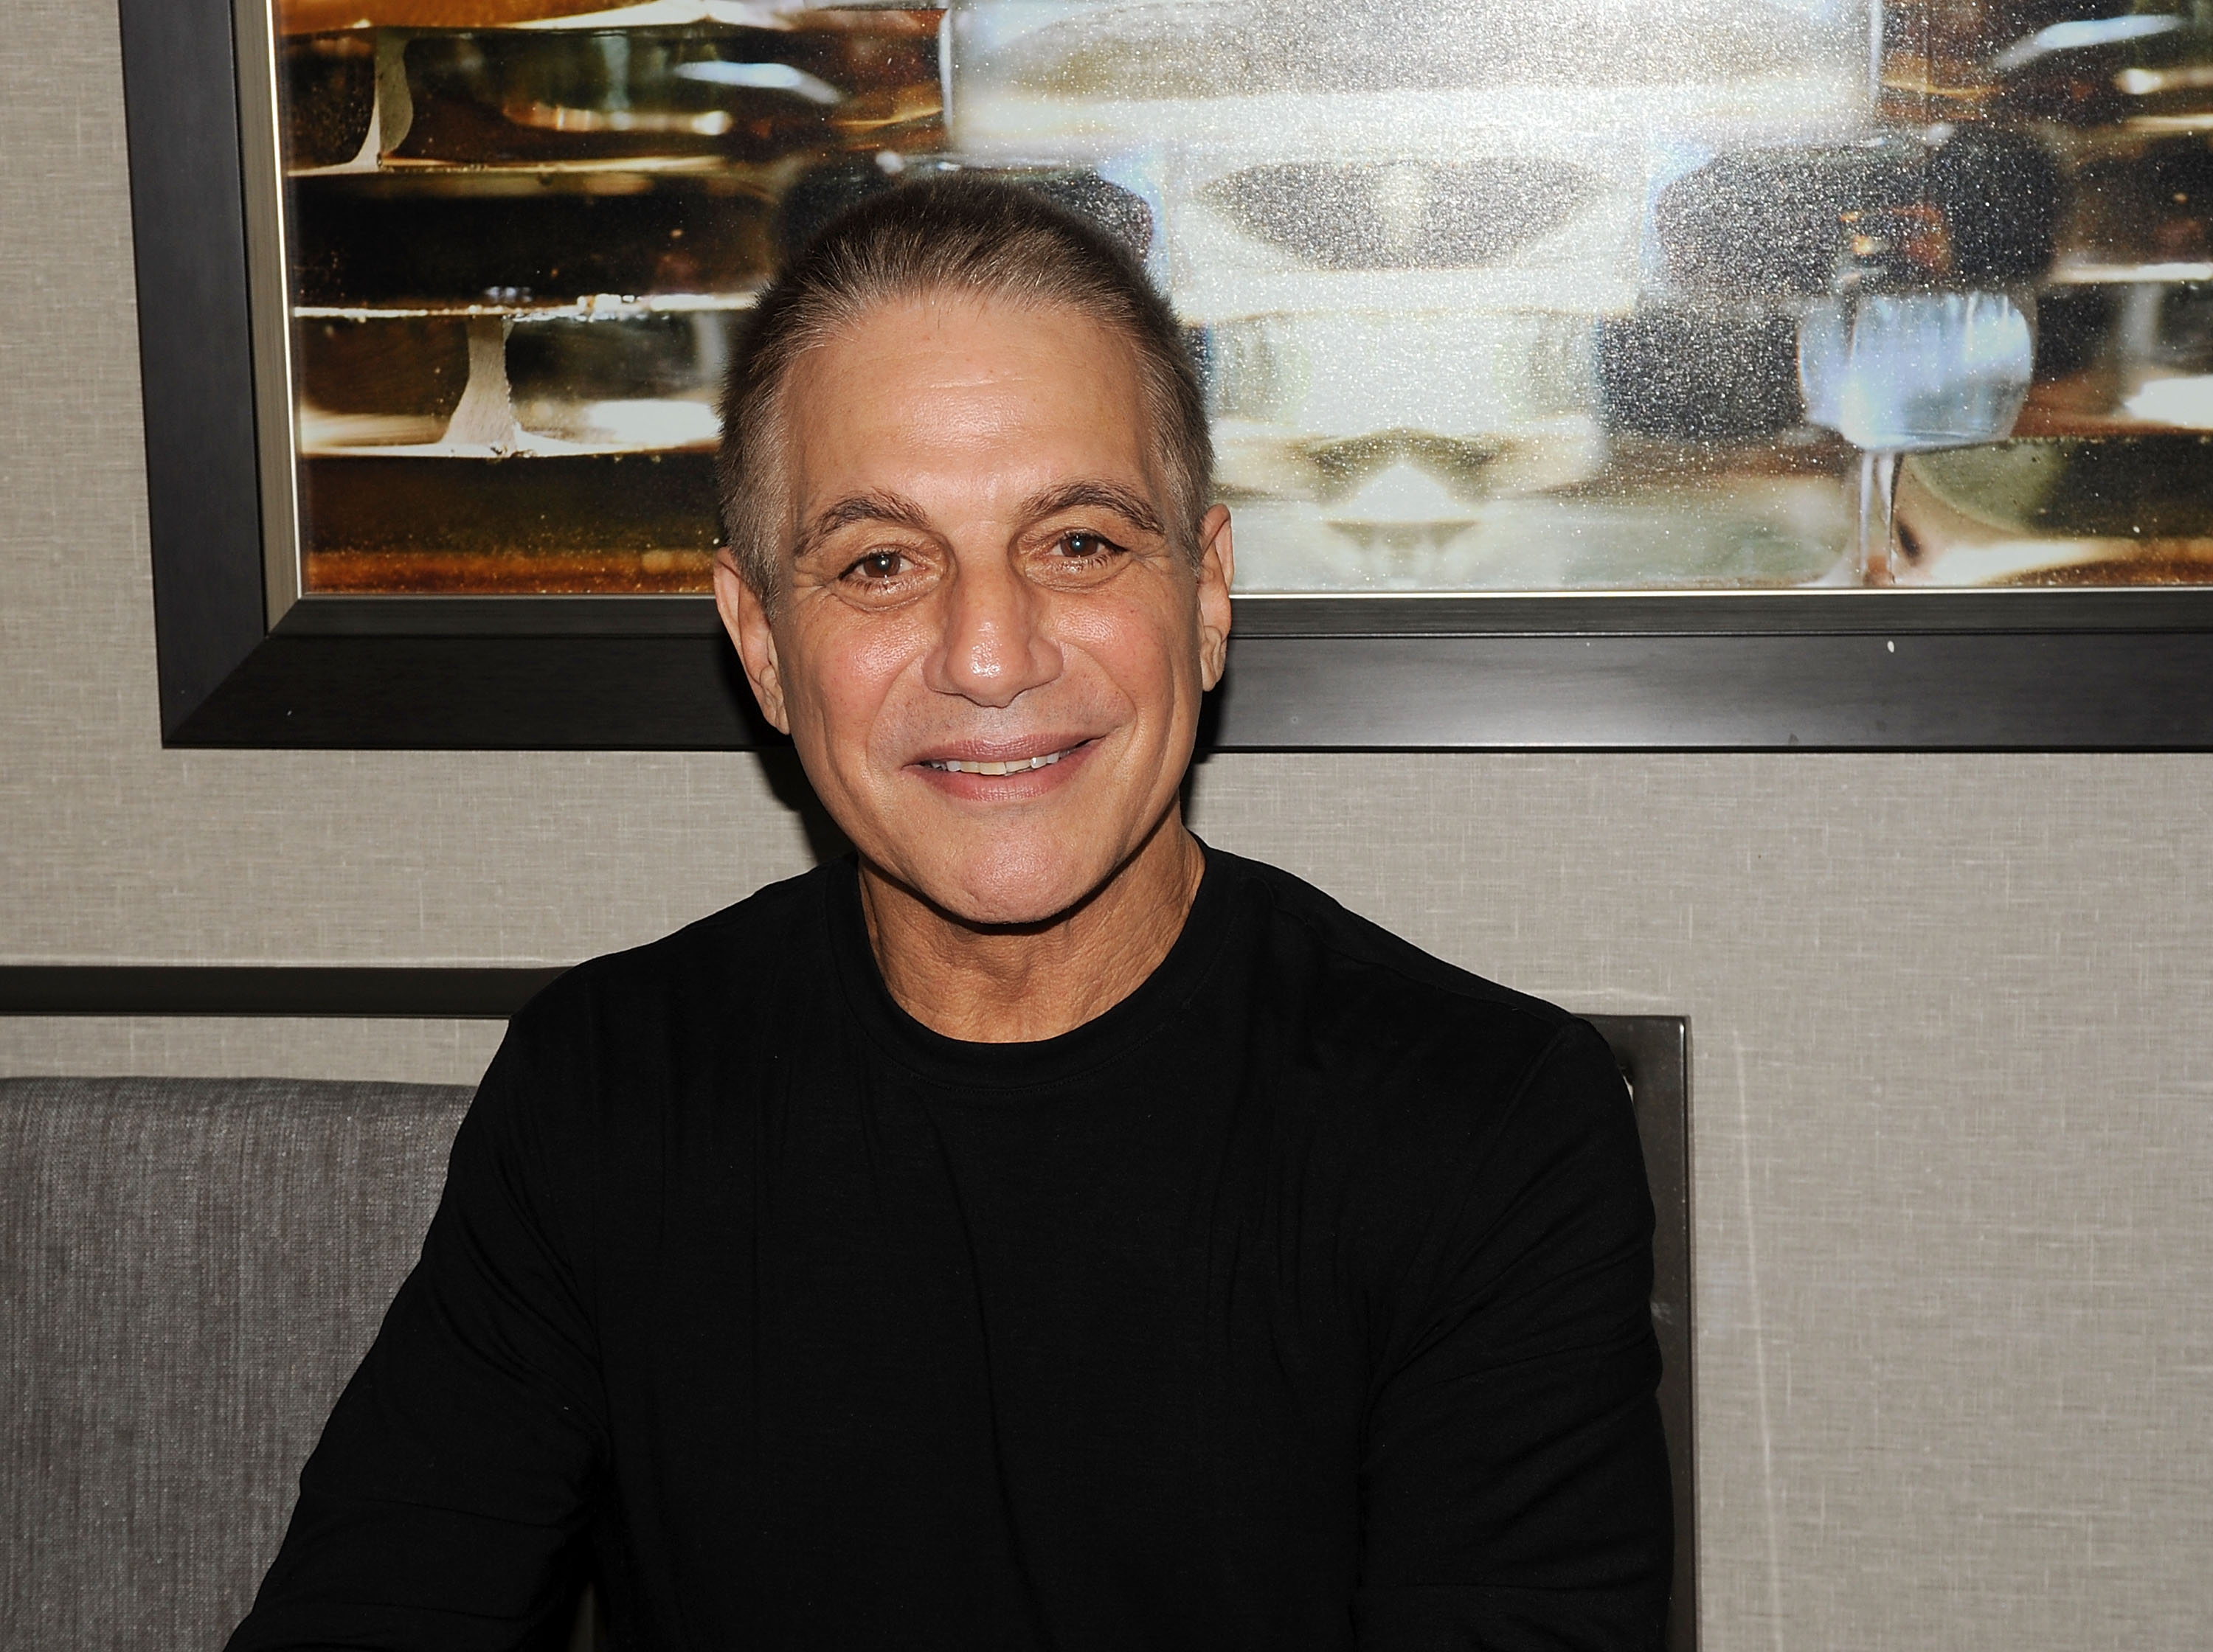 Tony Danza's Diet Is the Secret to His Ageless Good Looks